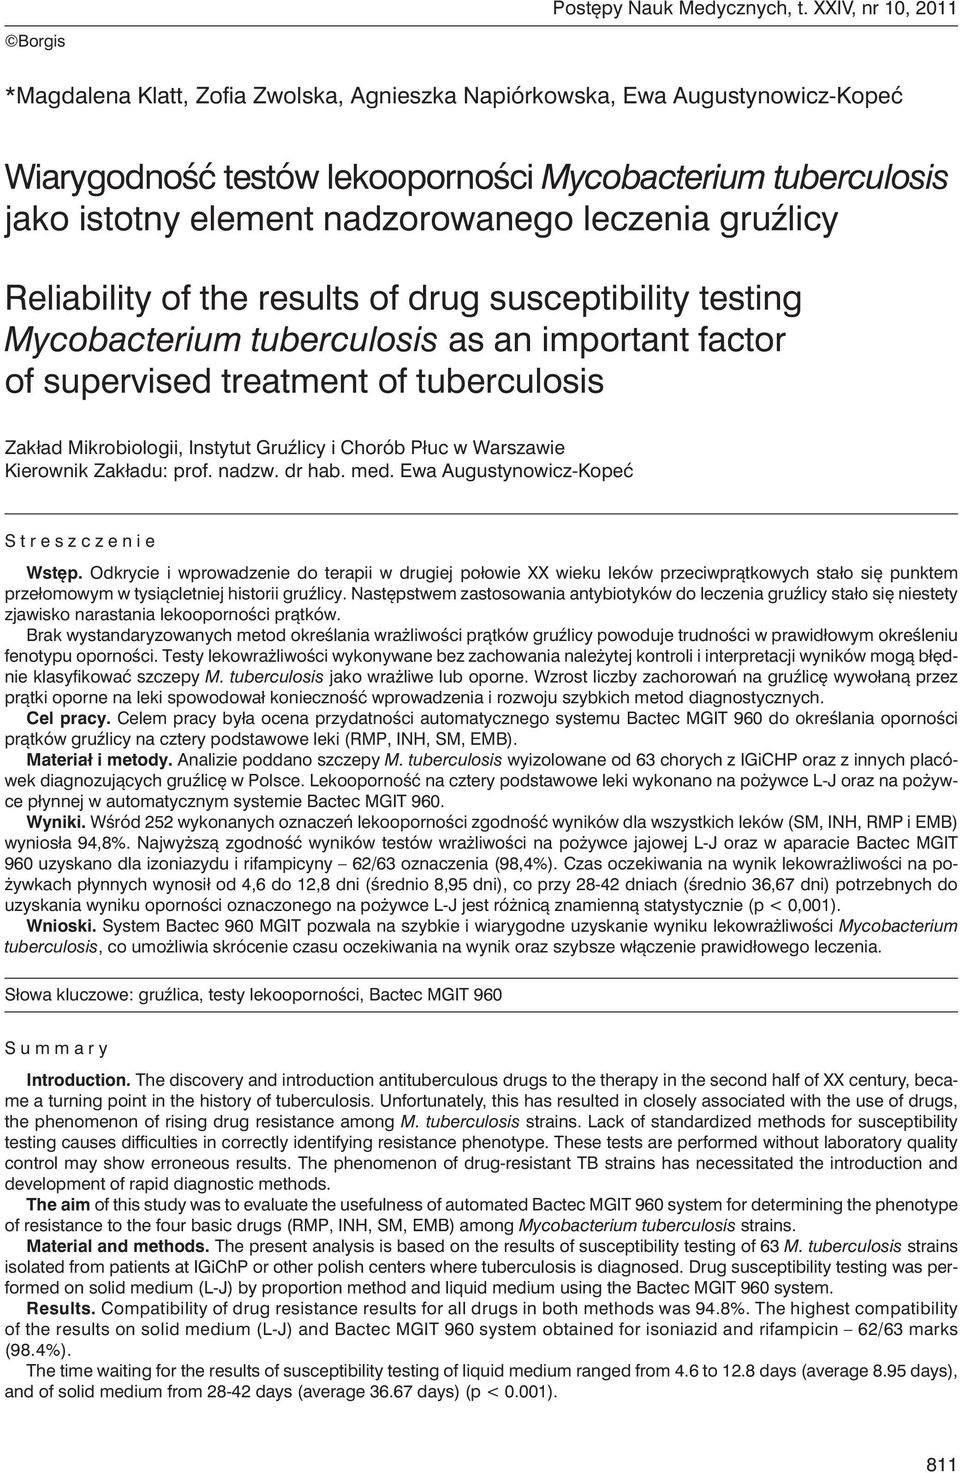 nadzorowanego leczenia gruźlicy Reliability of the results of drug susceptibility testing Mycobacterium tuberculosis as an important factor of supervised treatment of tuberculosis Zakład